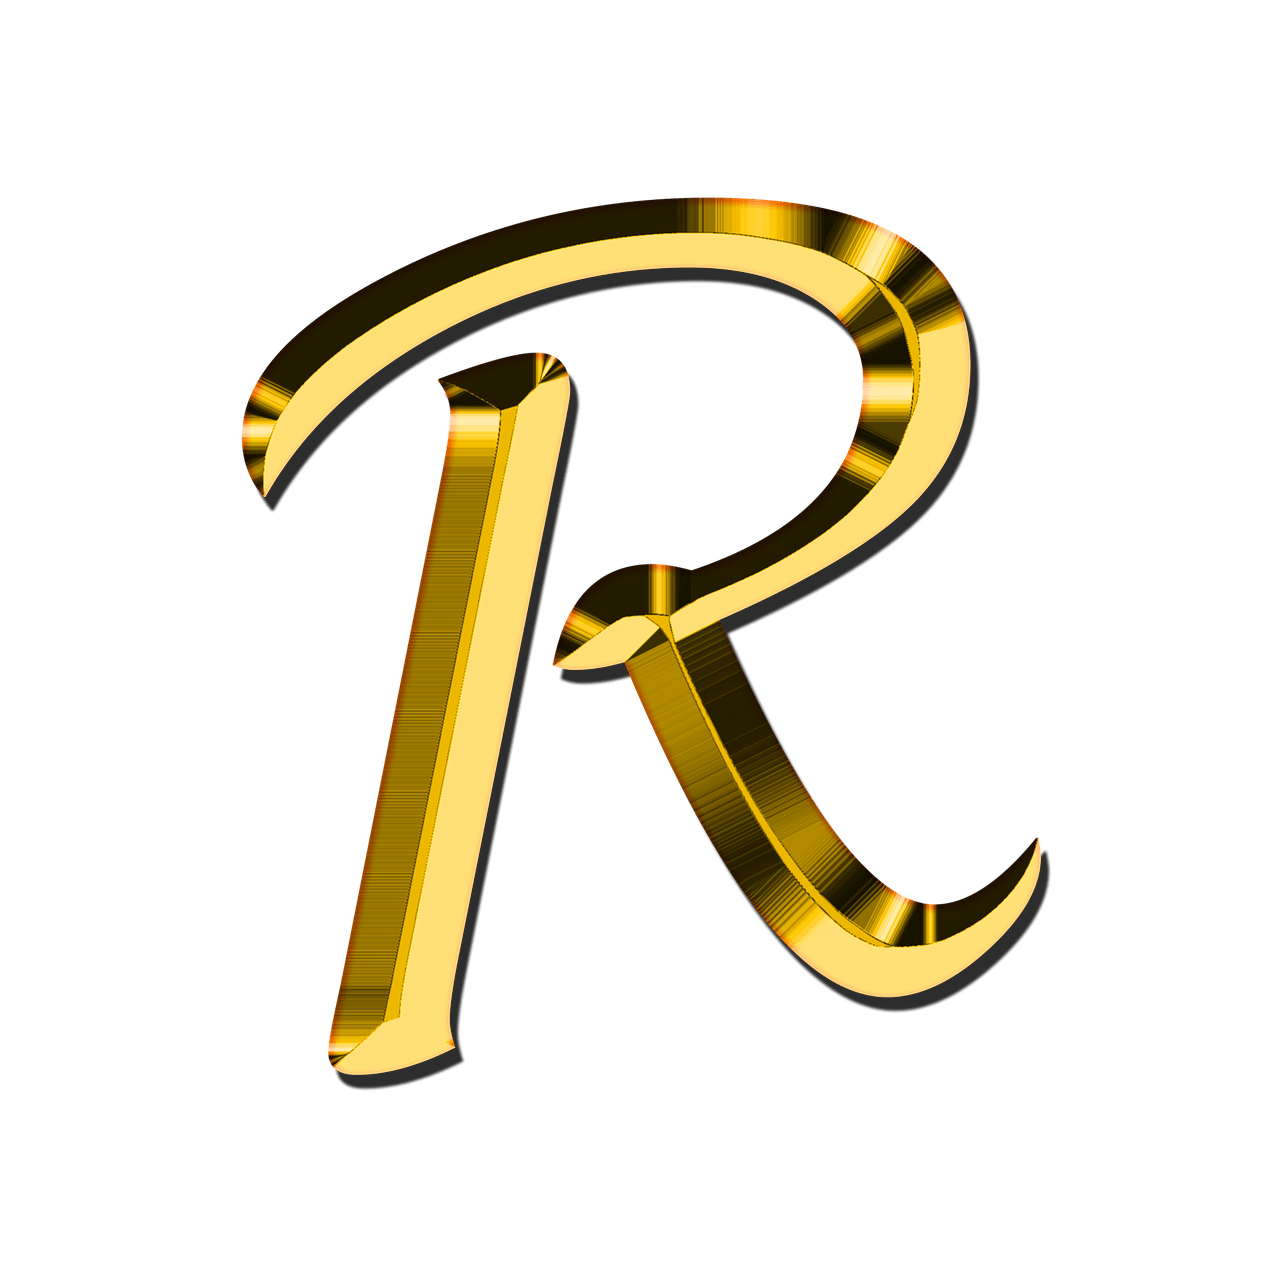 R Letter HD Image Free PNG Image